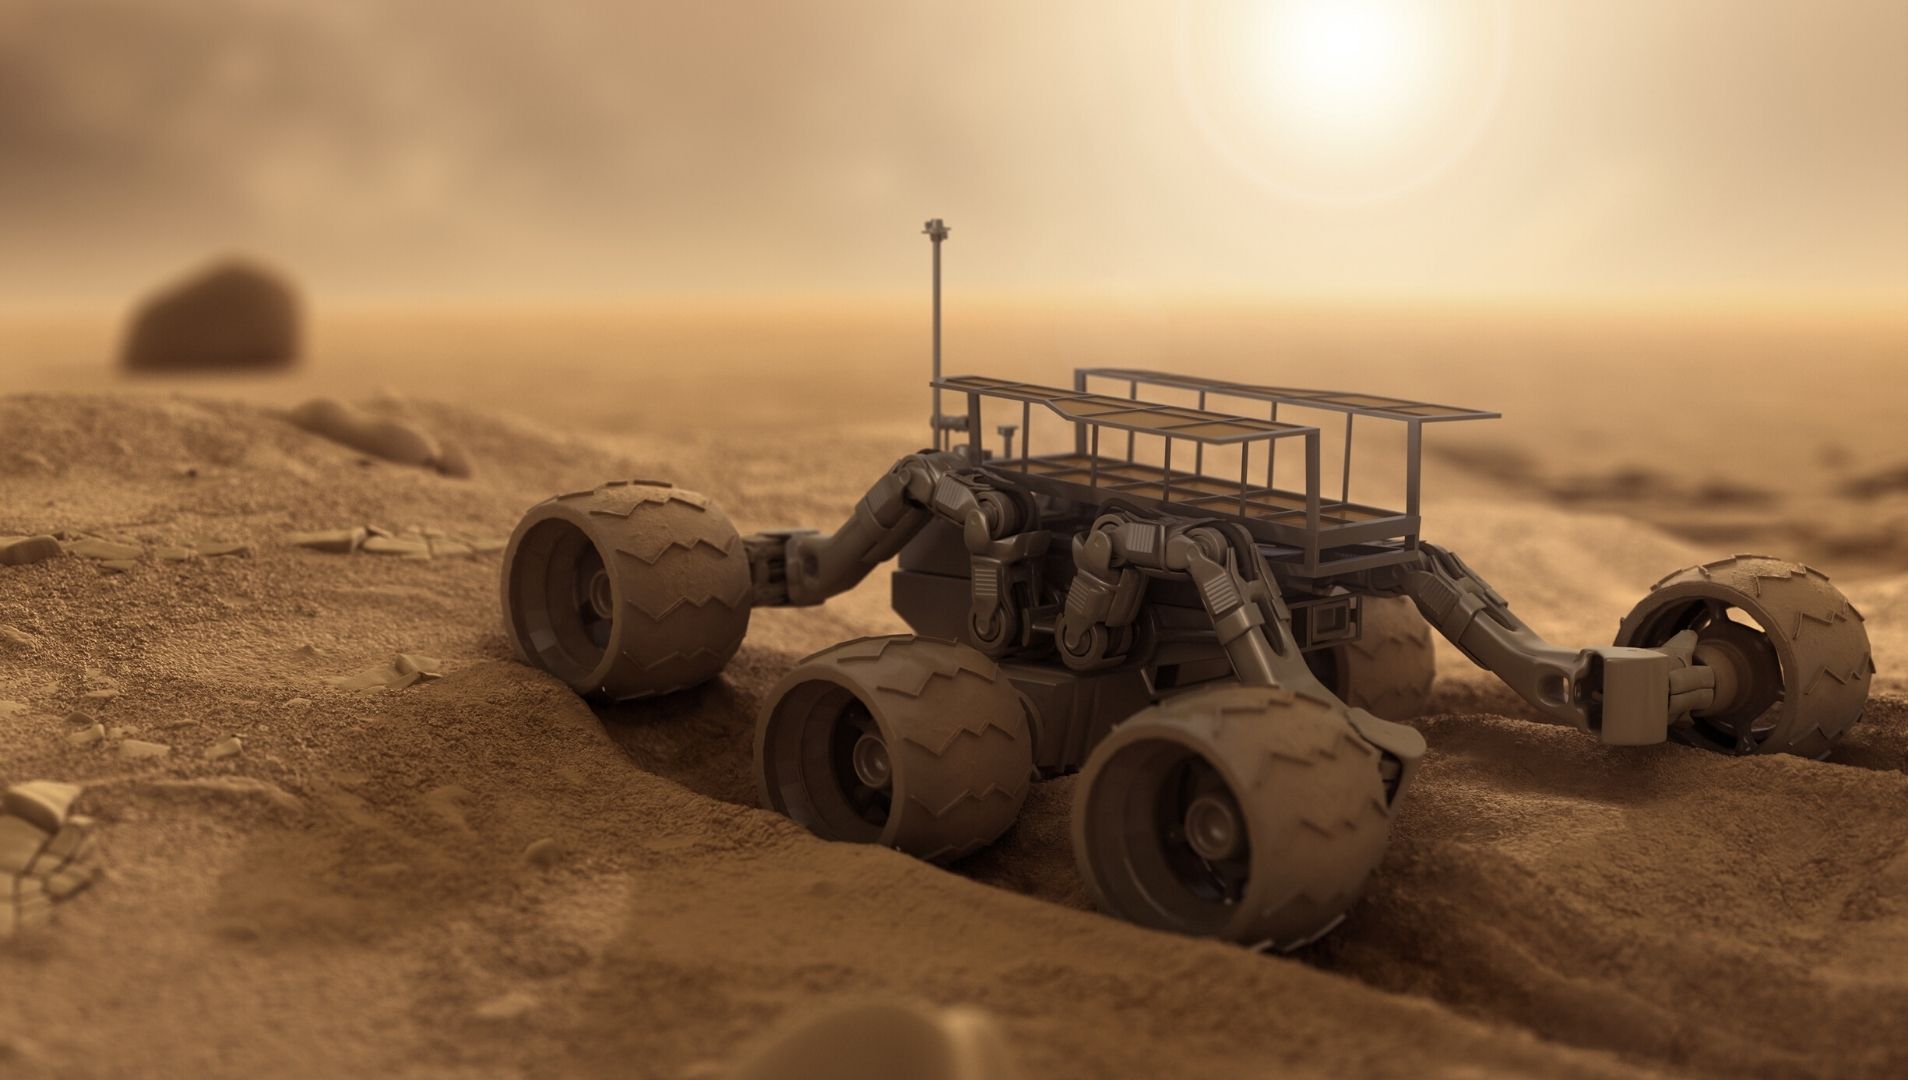 Image of a robot rover searching for objects